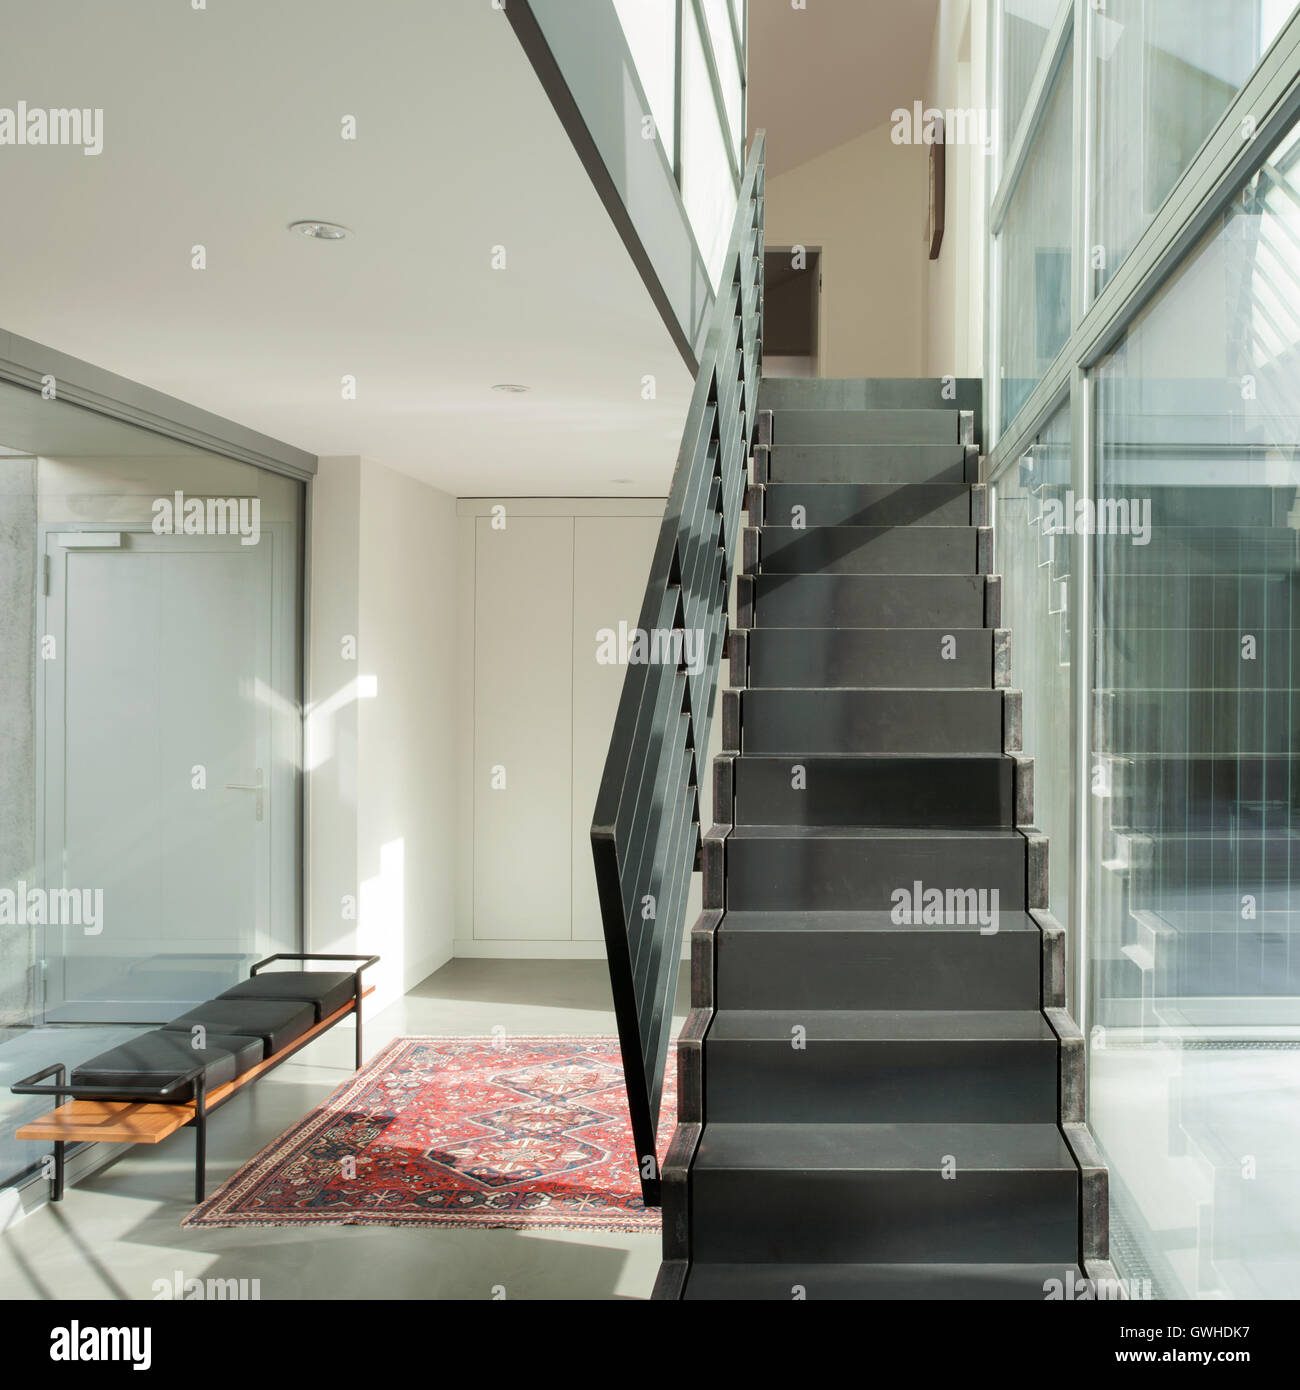 Interior of a modern house, hall with iron staircase Stock Photo